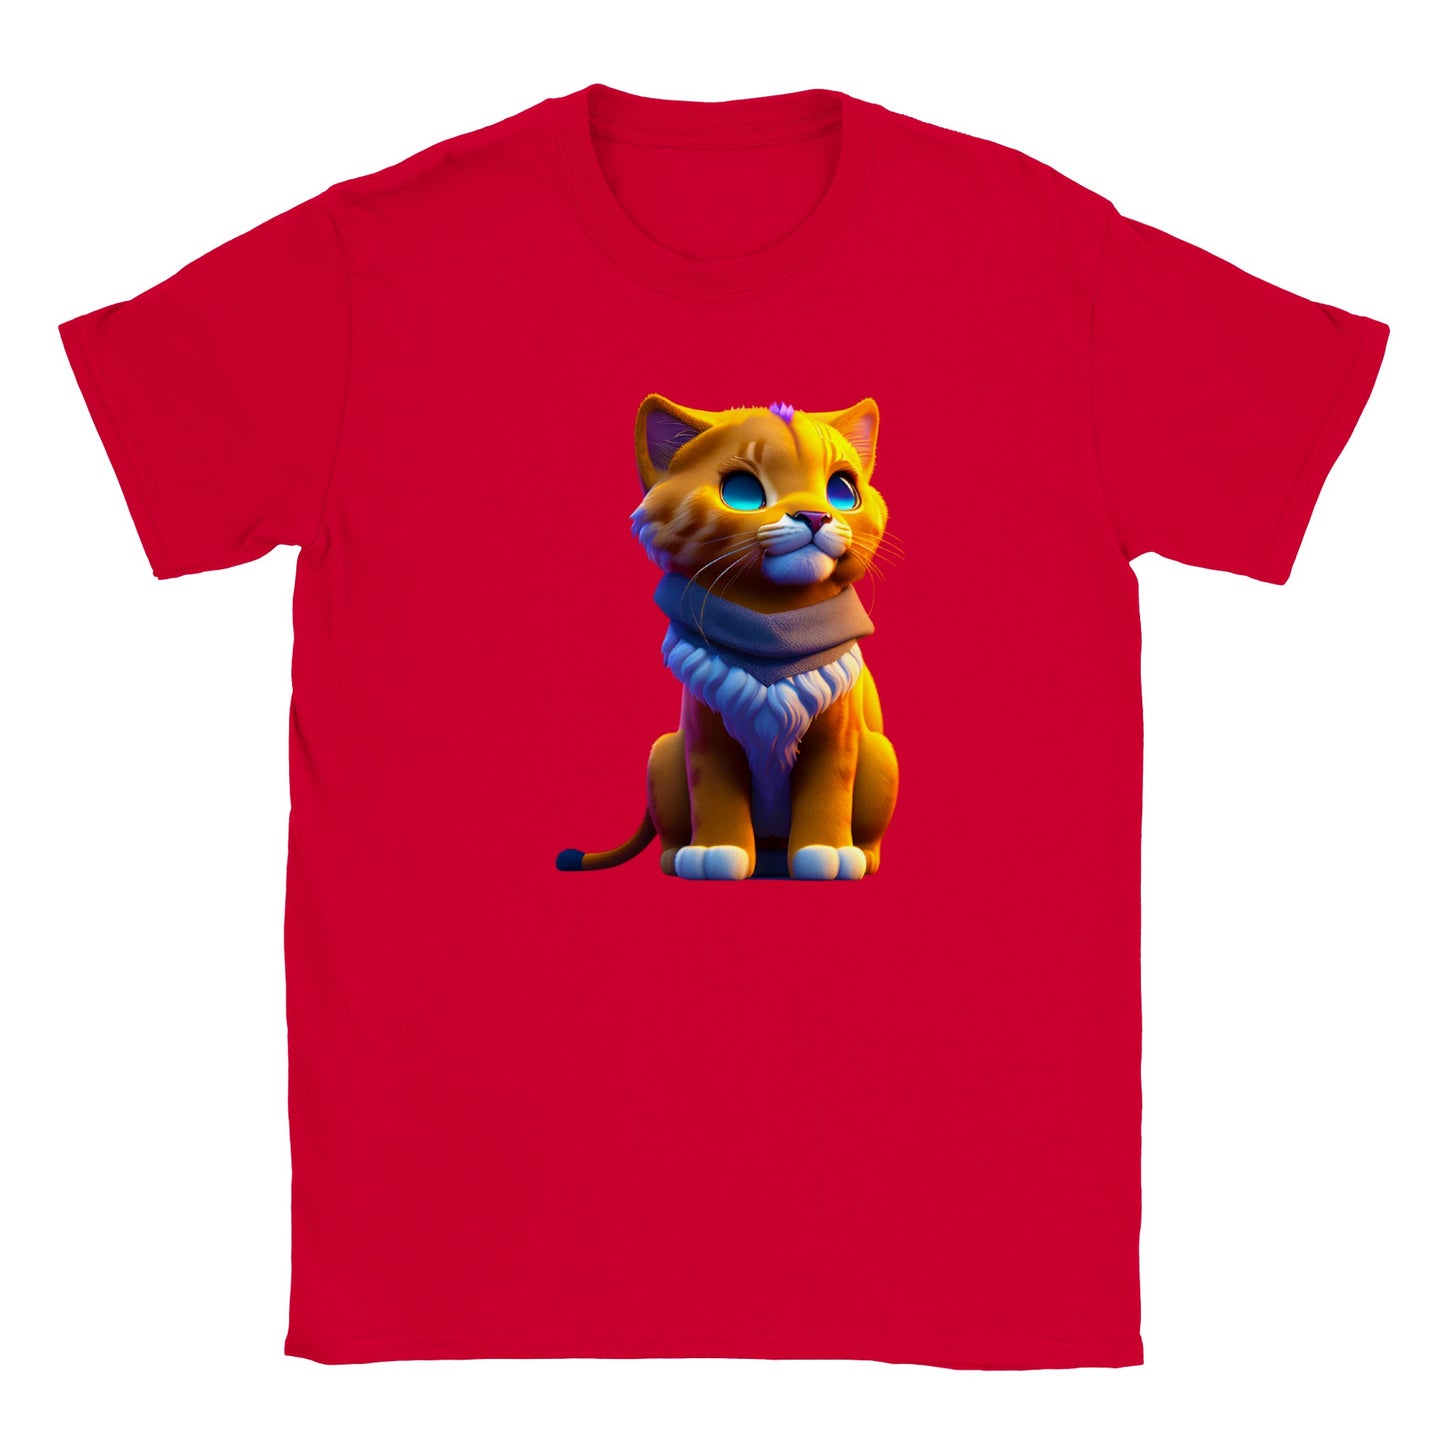 Adorable, Cool, Cute Cats and Kittens Toy - Classic Kids Crewneck T-Shirt 27